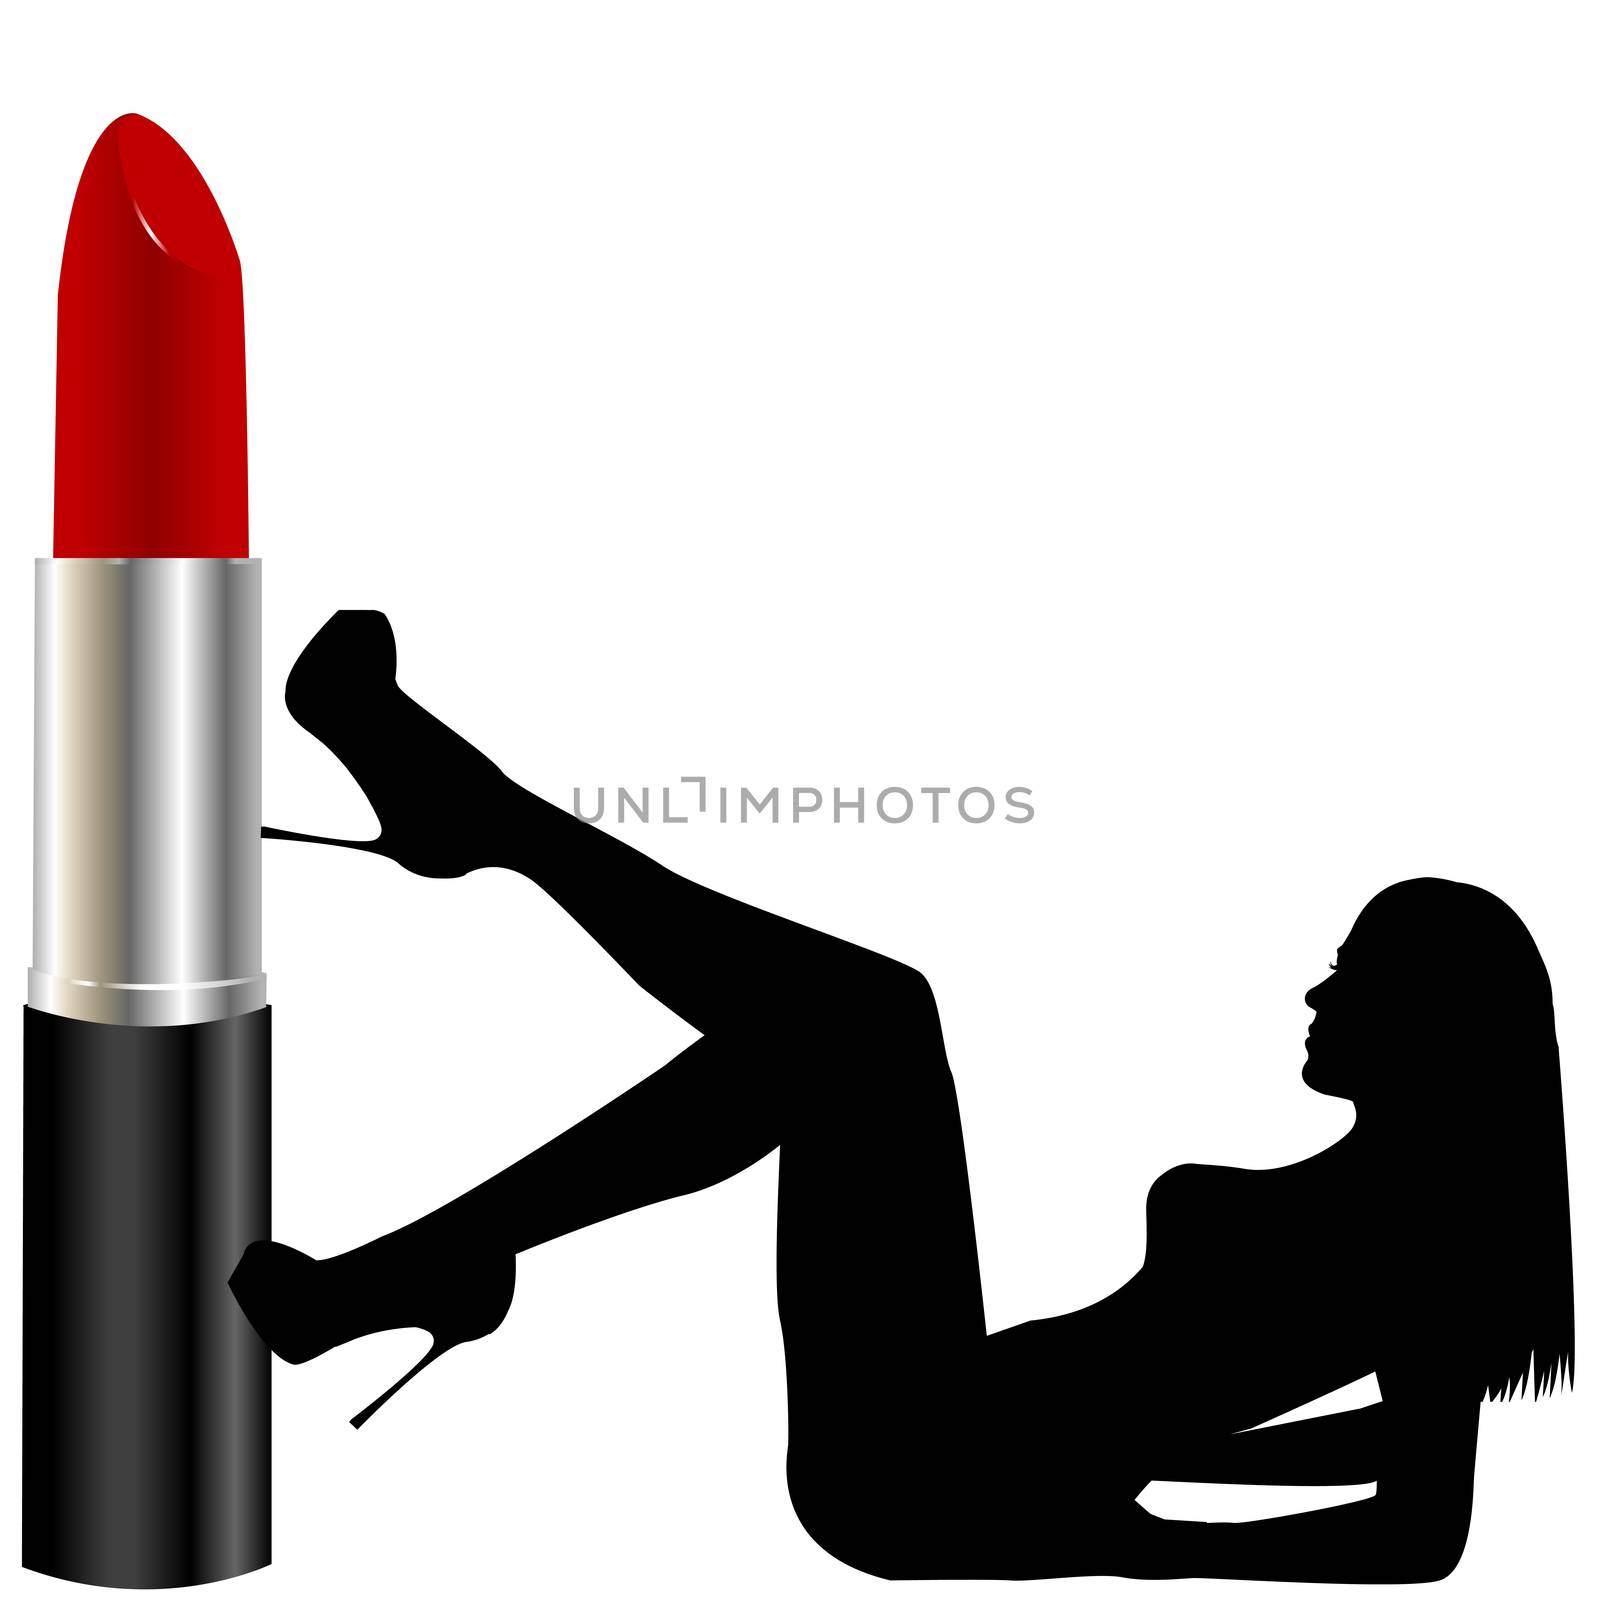 Sexy woman silhouette on the back with red lipstick